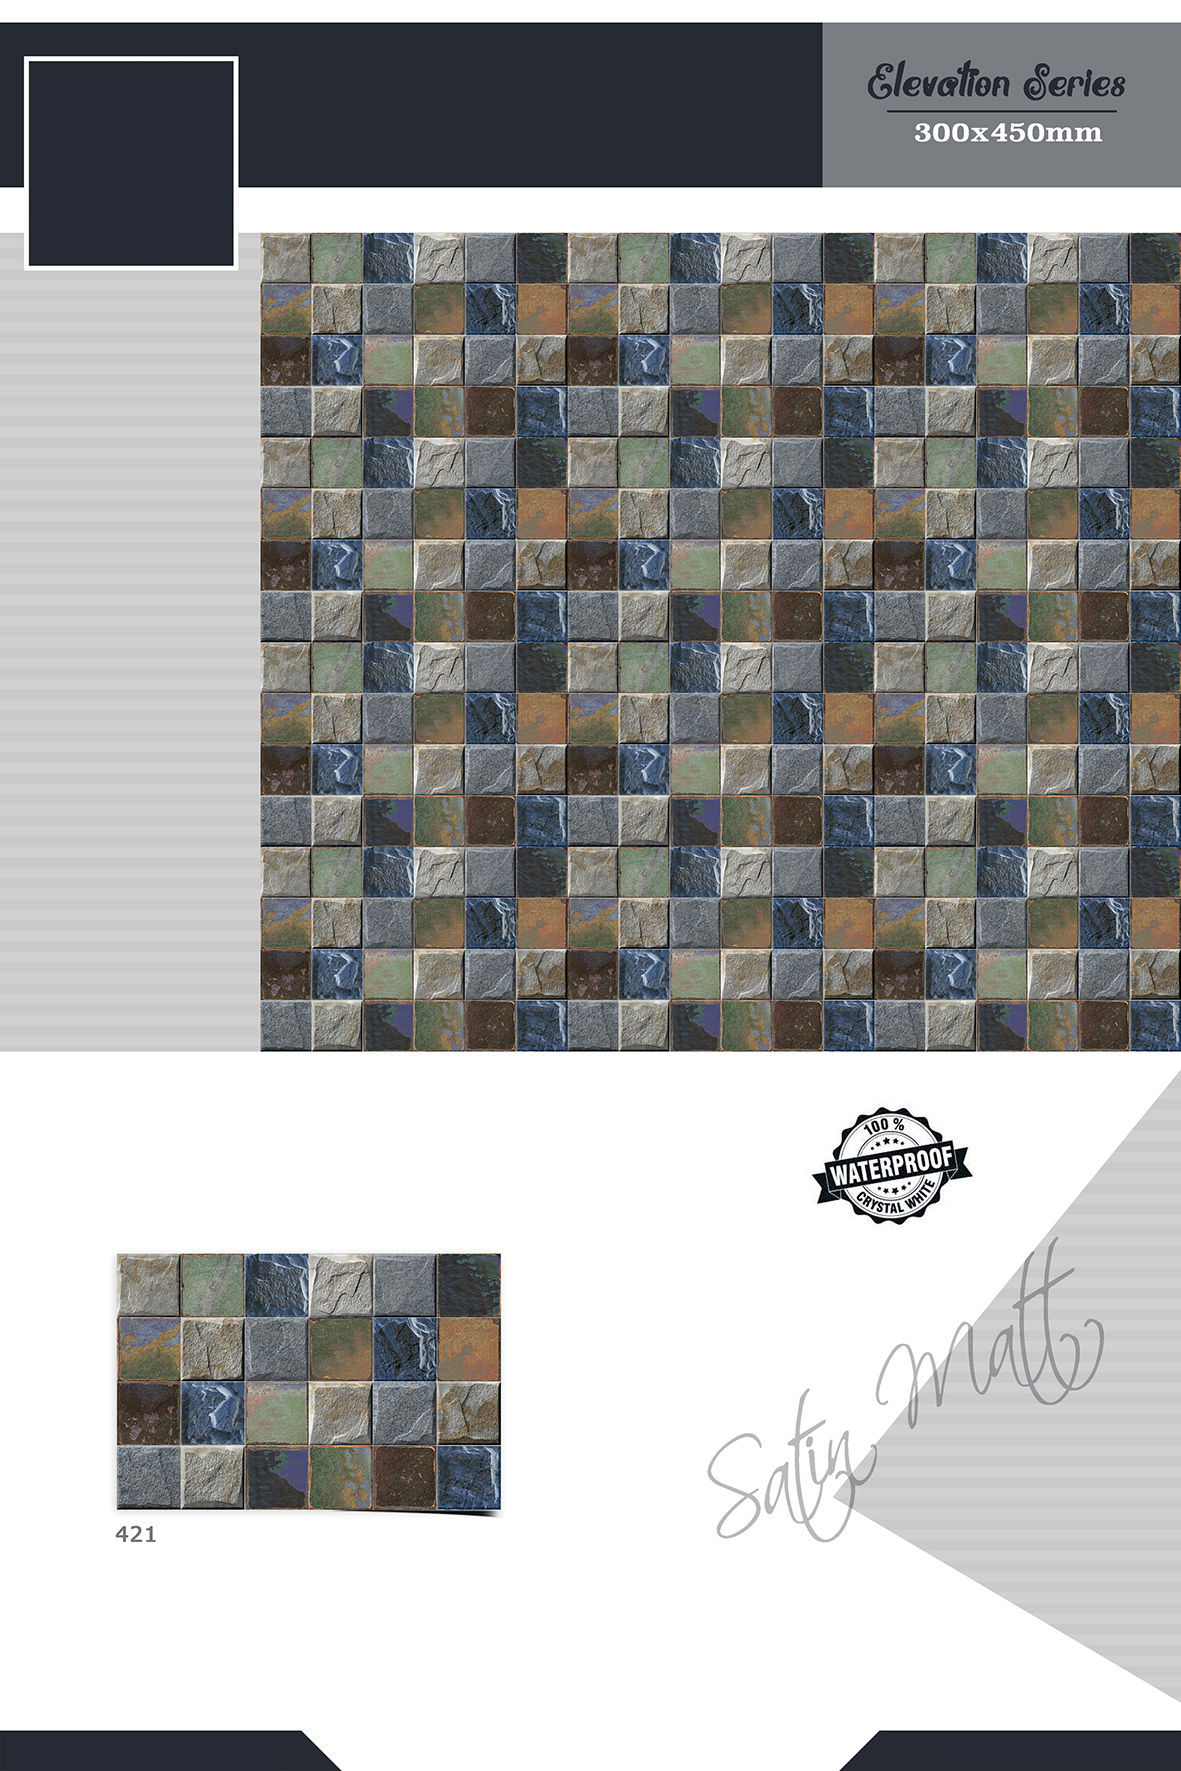 12x18 Evevation wall Tiles